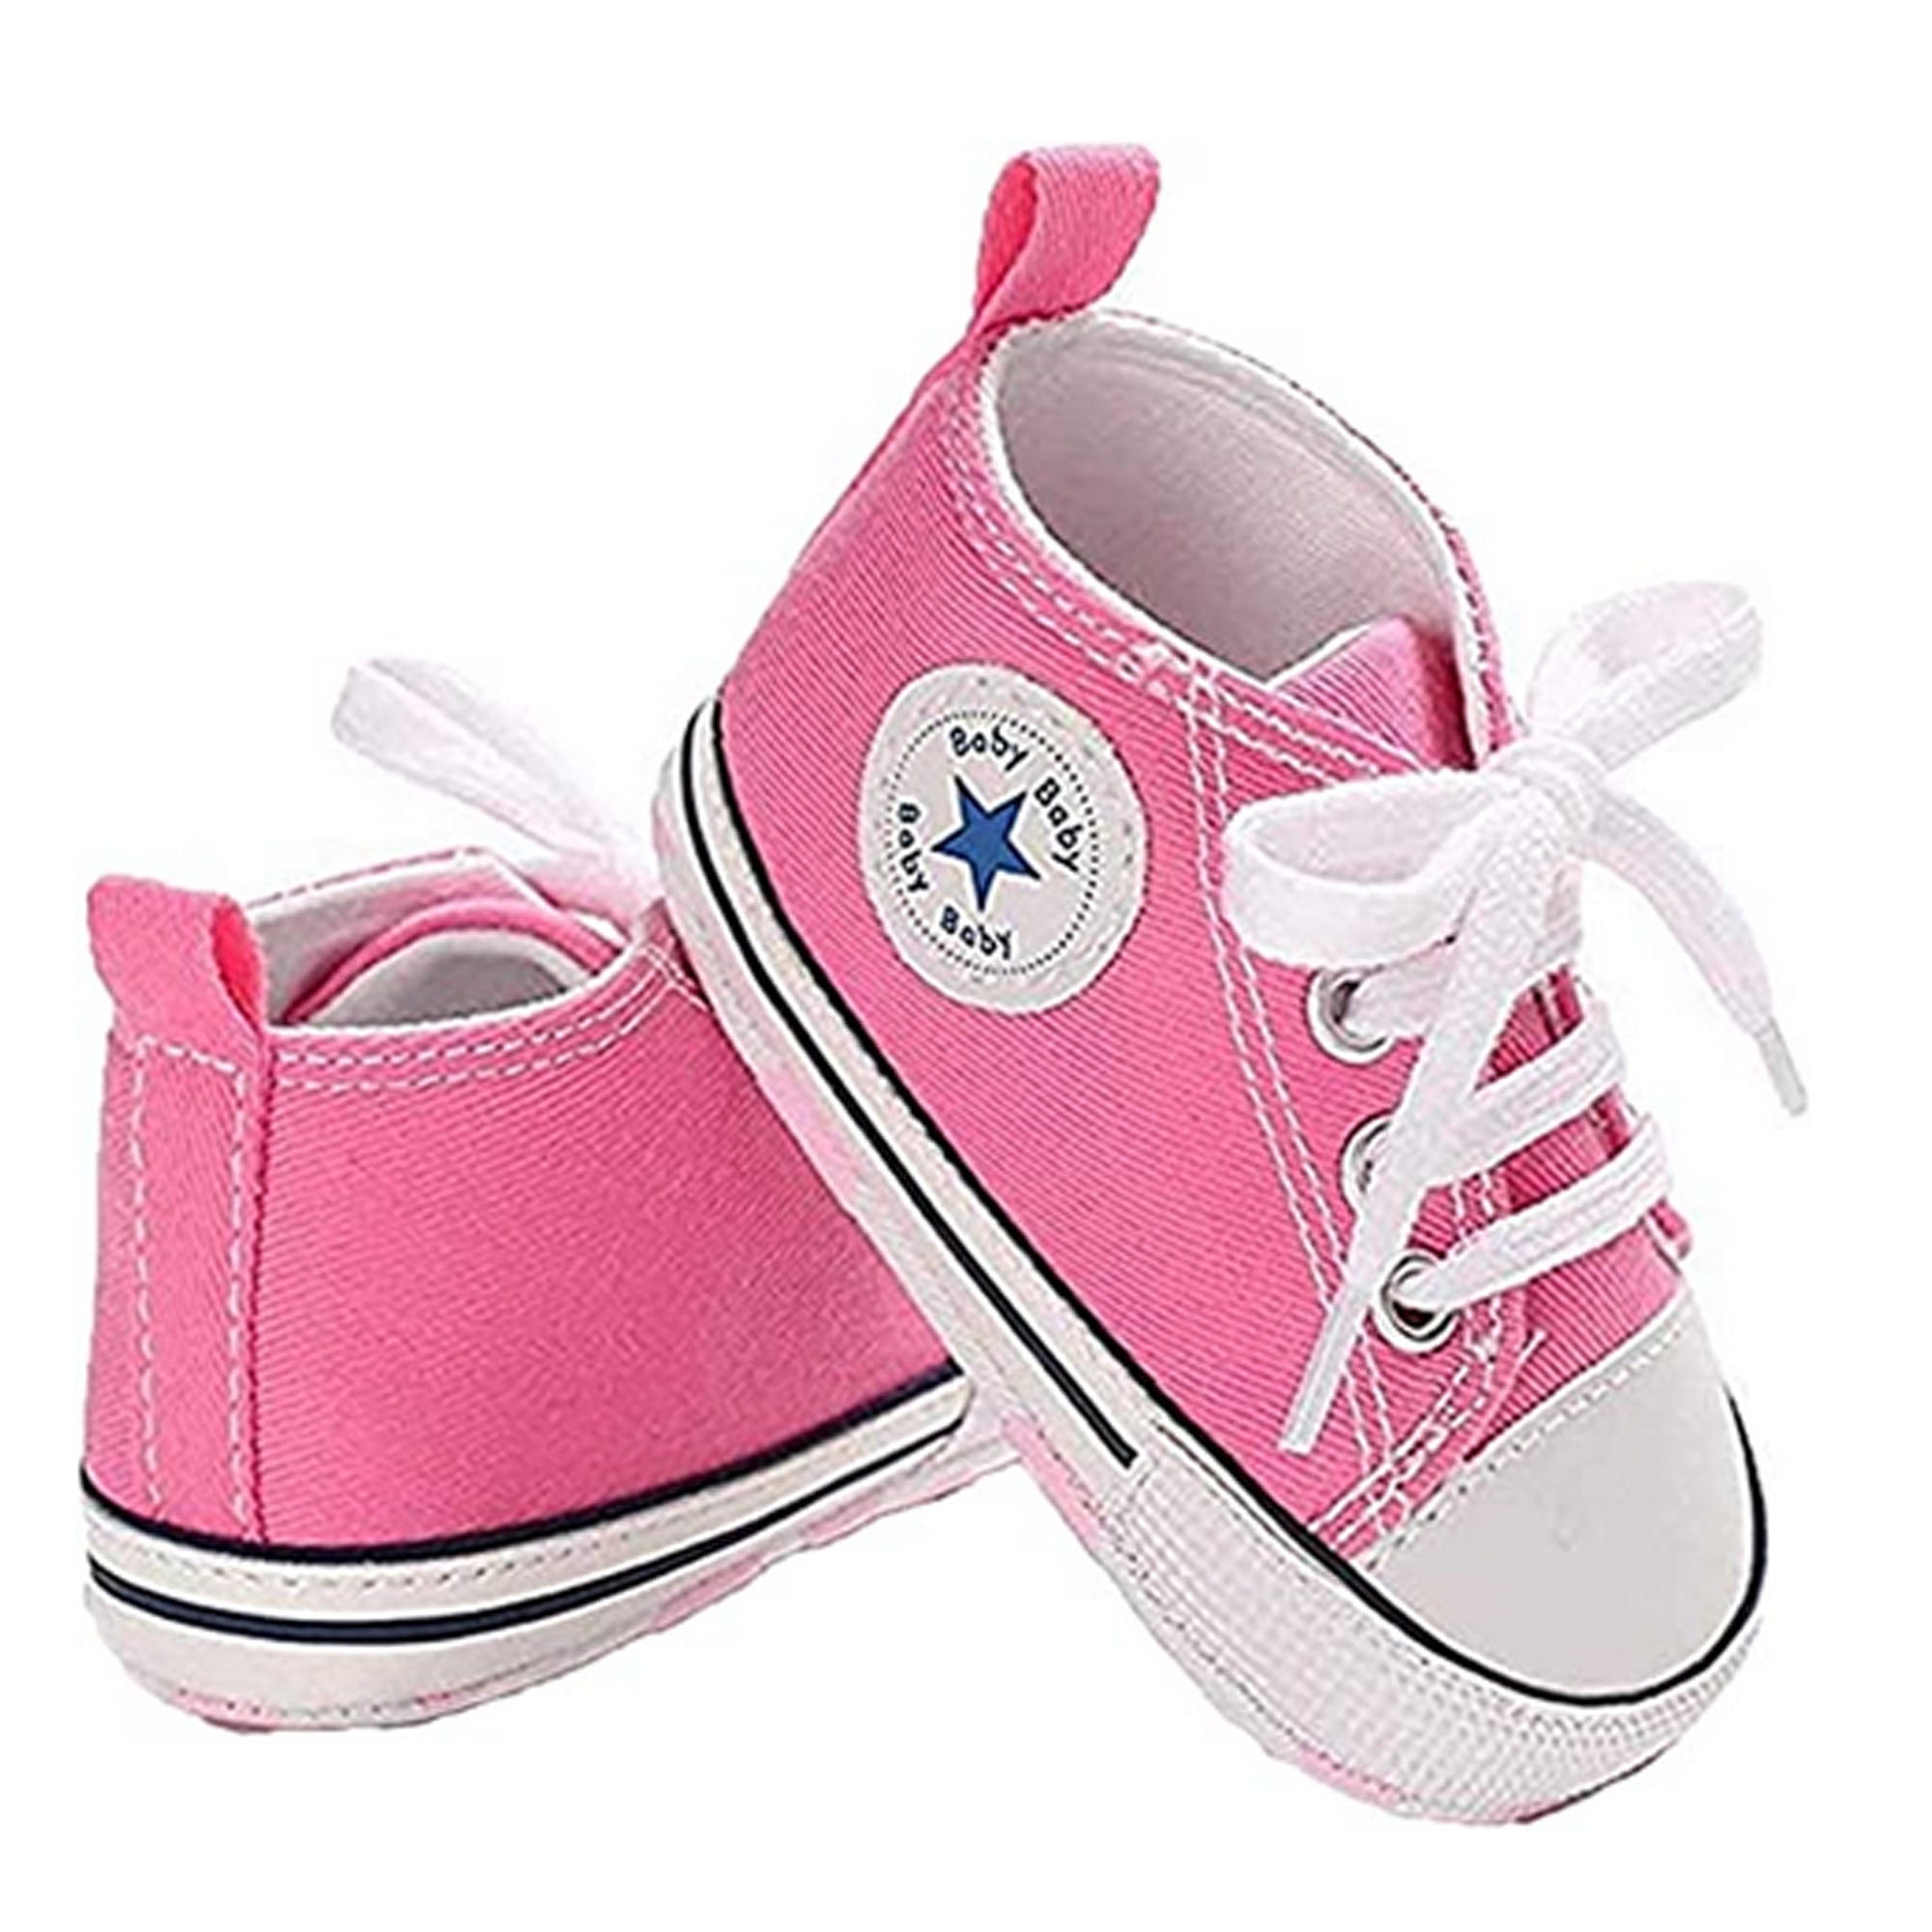 6~12 Month, Hot Pink CYCTECH New Fashion Baby Infant Kids Girl Soft Sole Crib Toddler Newborn Shoes